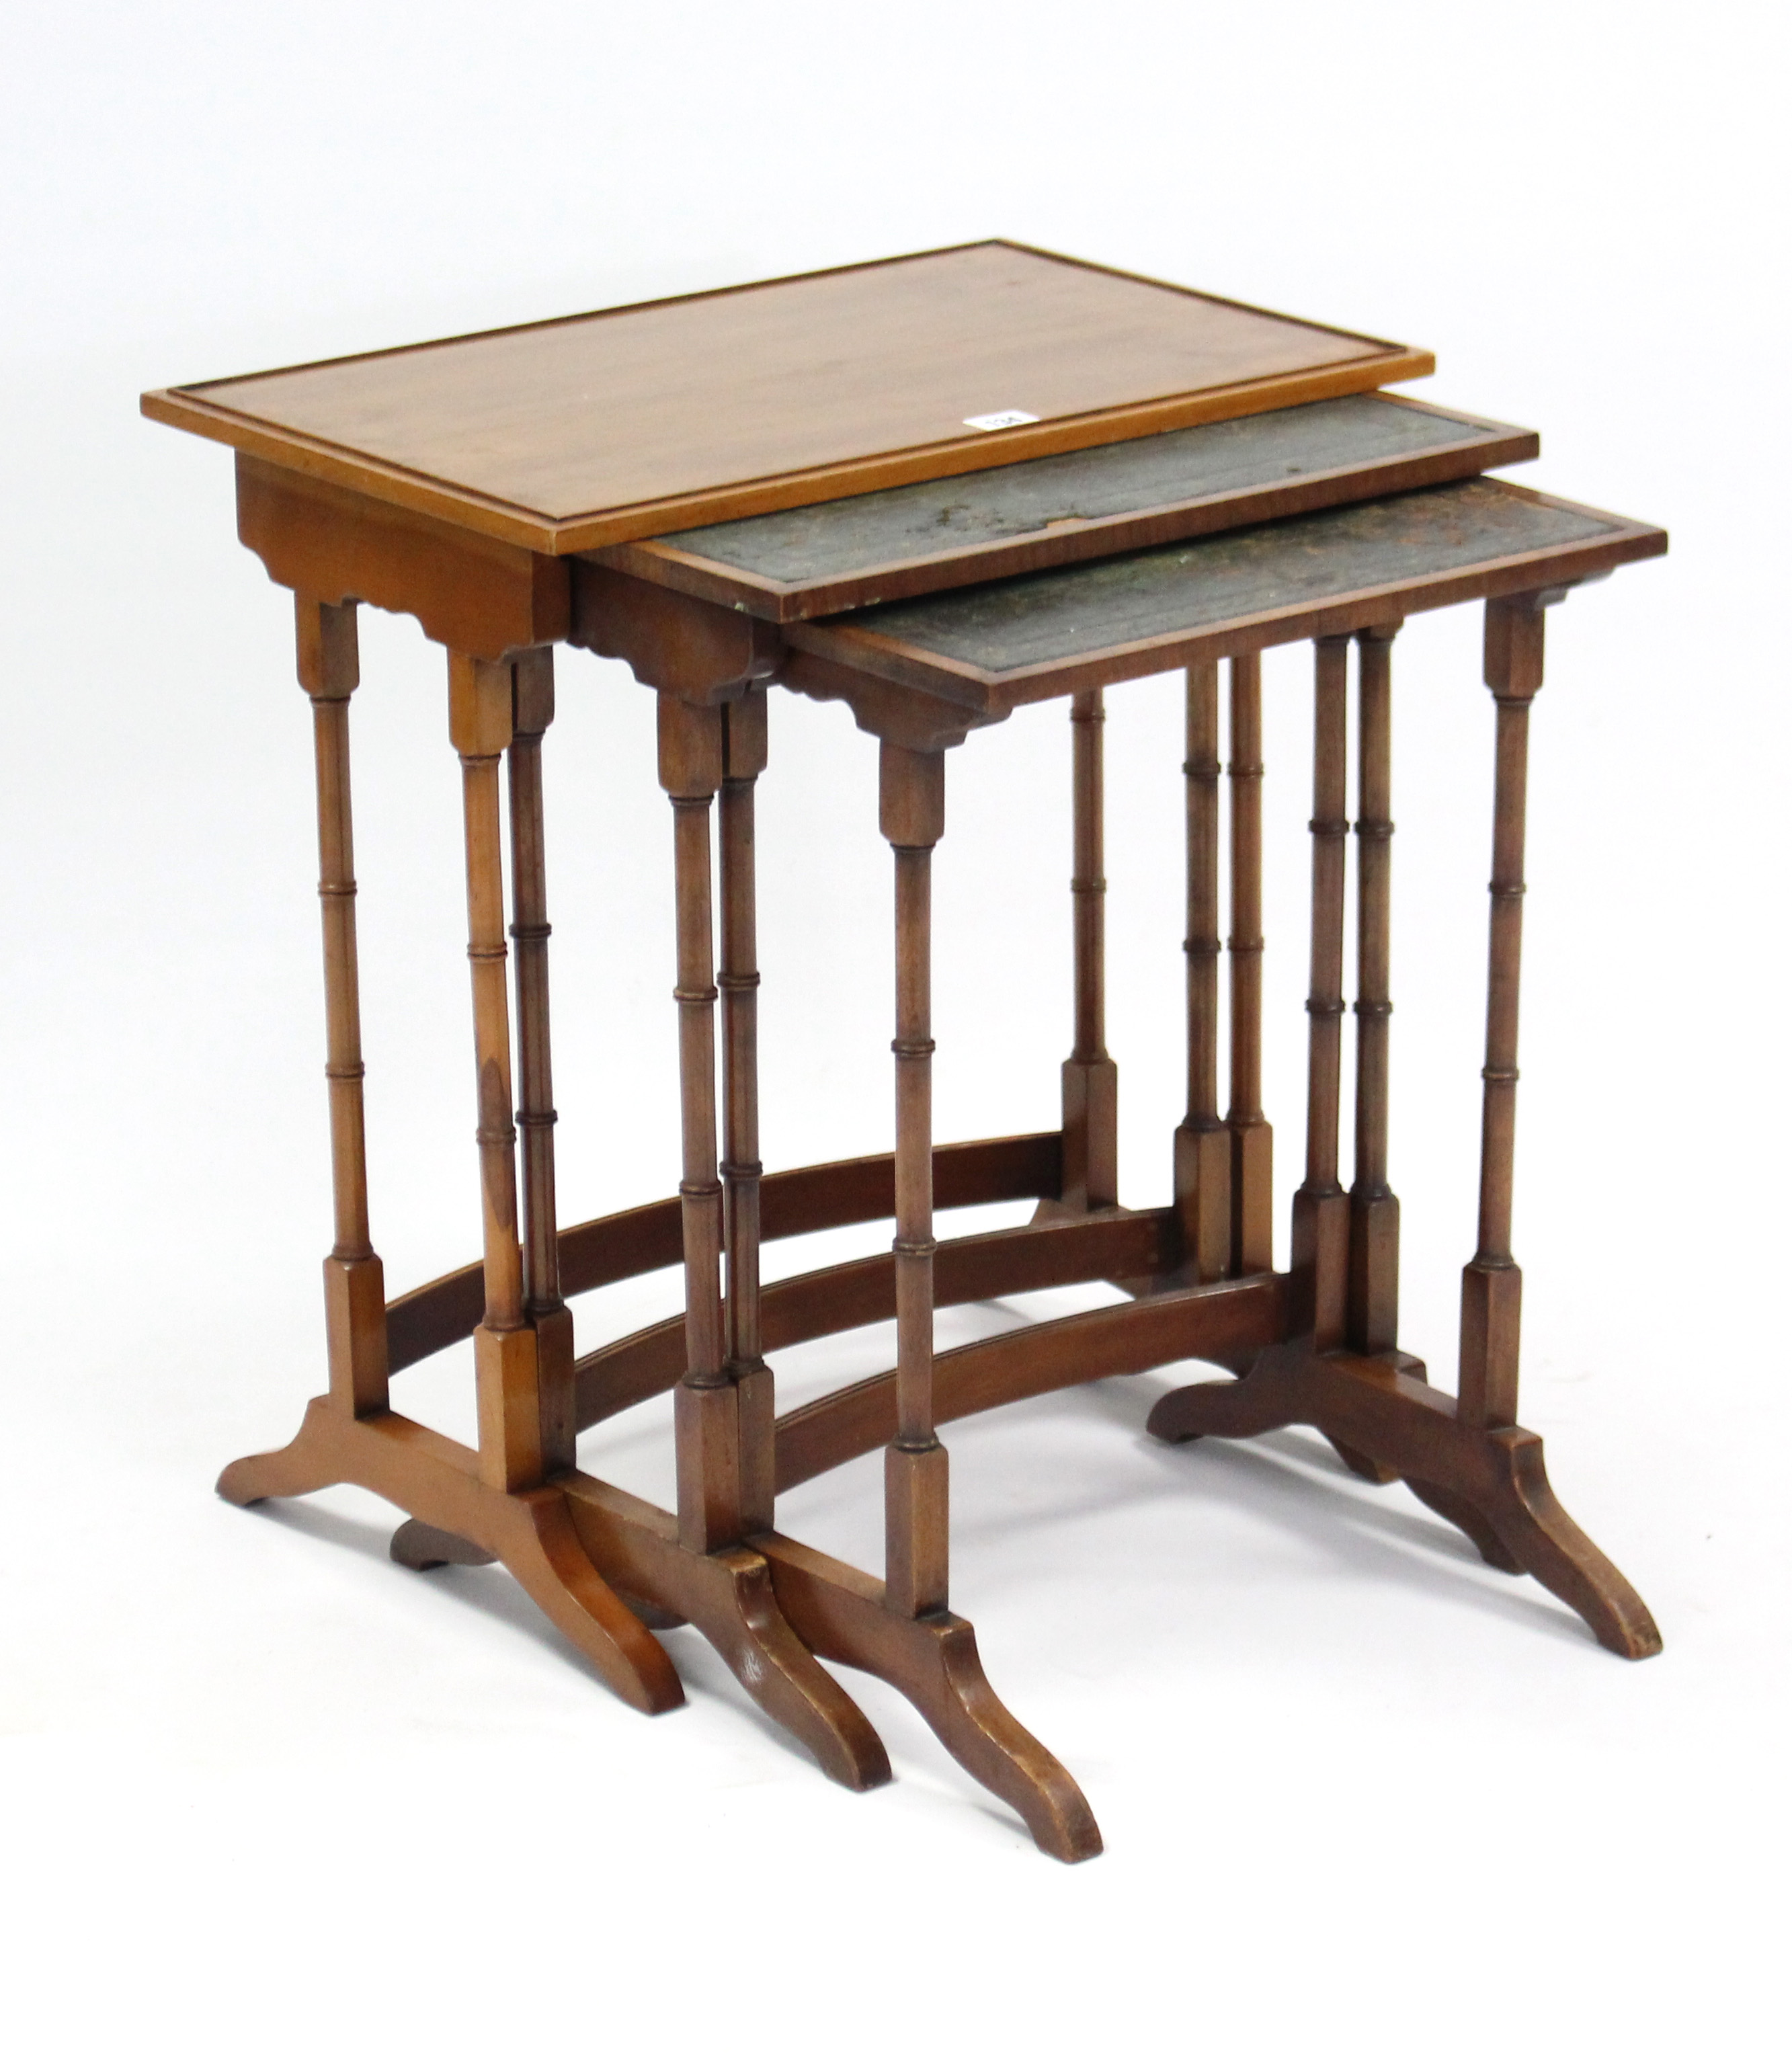 A yew wood nest of three rectangular occasional tables, each table on four-spider-turned legs.